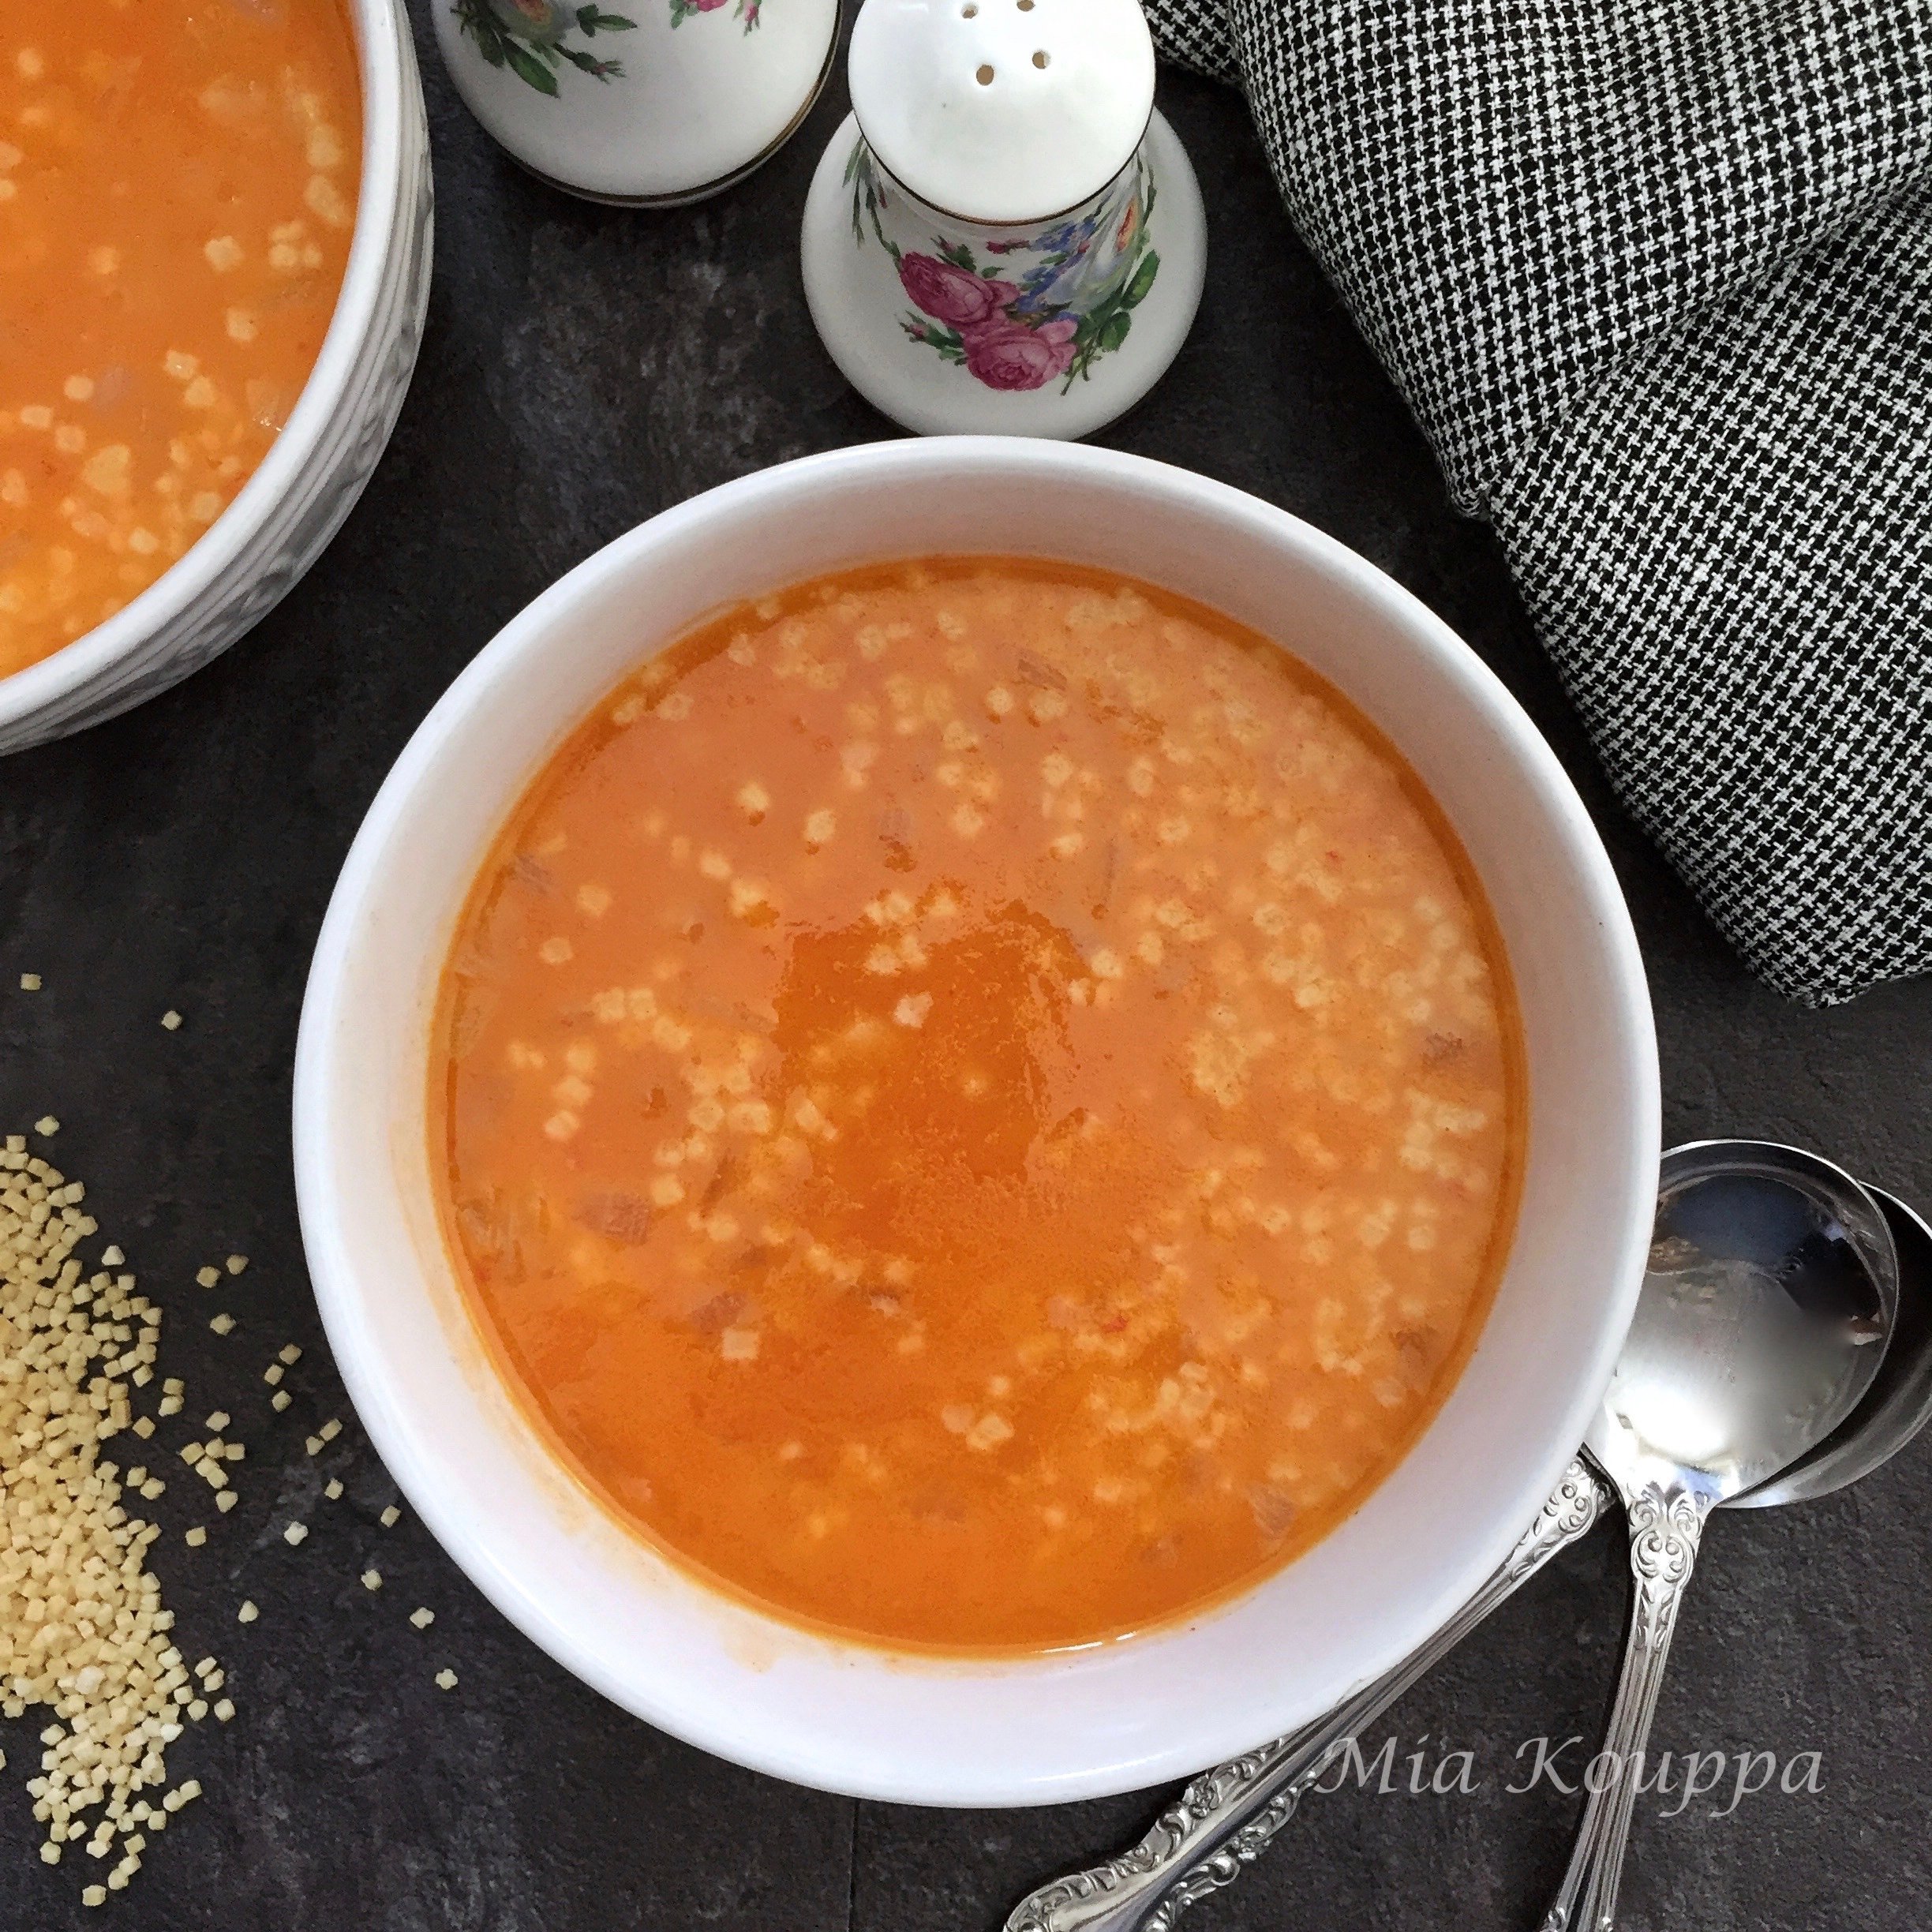 Sour trahana soup with tomato (Σούπα με ξινό τραχανά και ντομάτα)